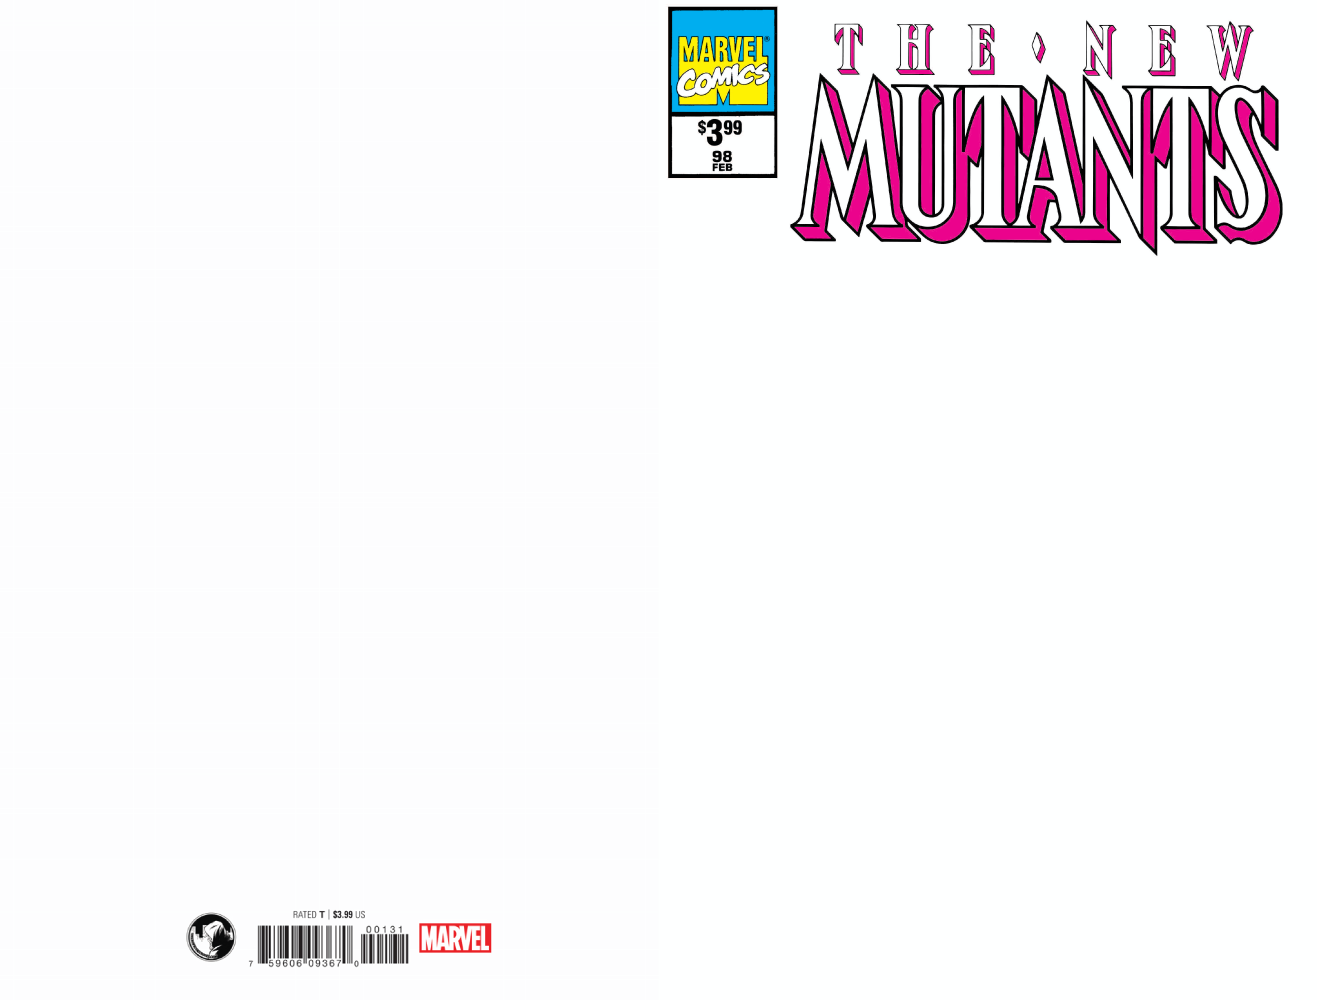 NEW MUTANTS #98 FACSIMILE EDITION BLANK EXCLUSIVE (07/03/2019)